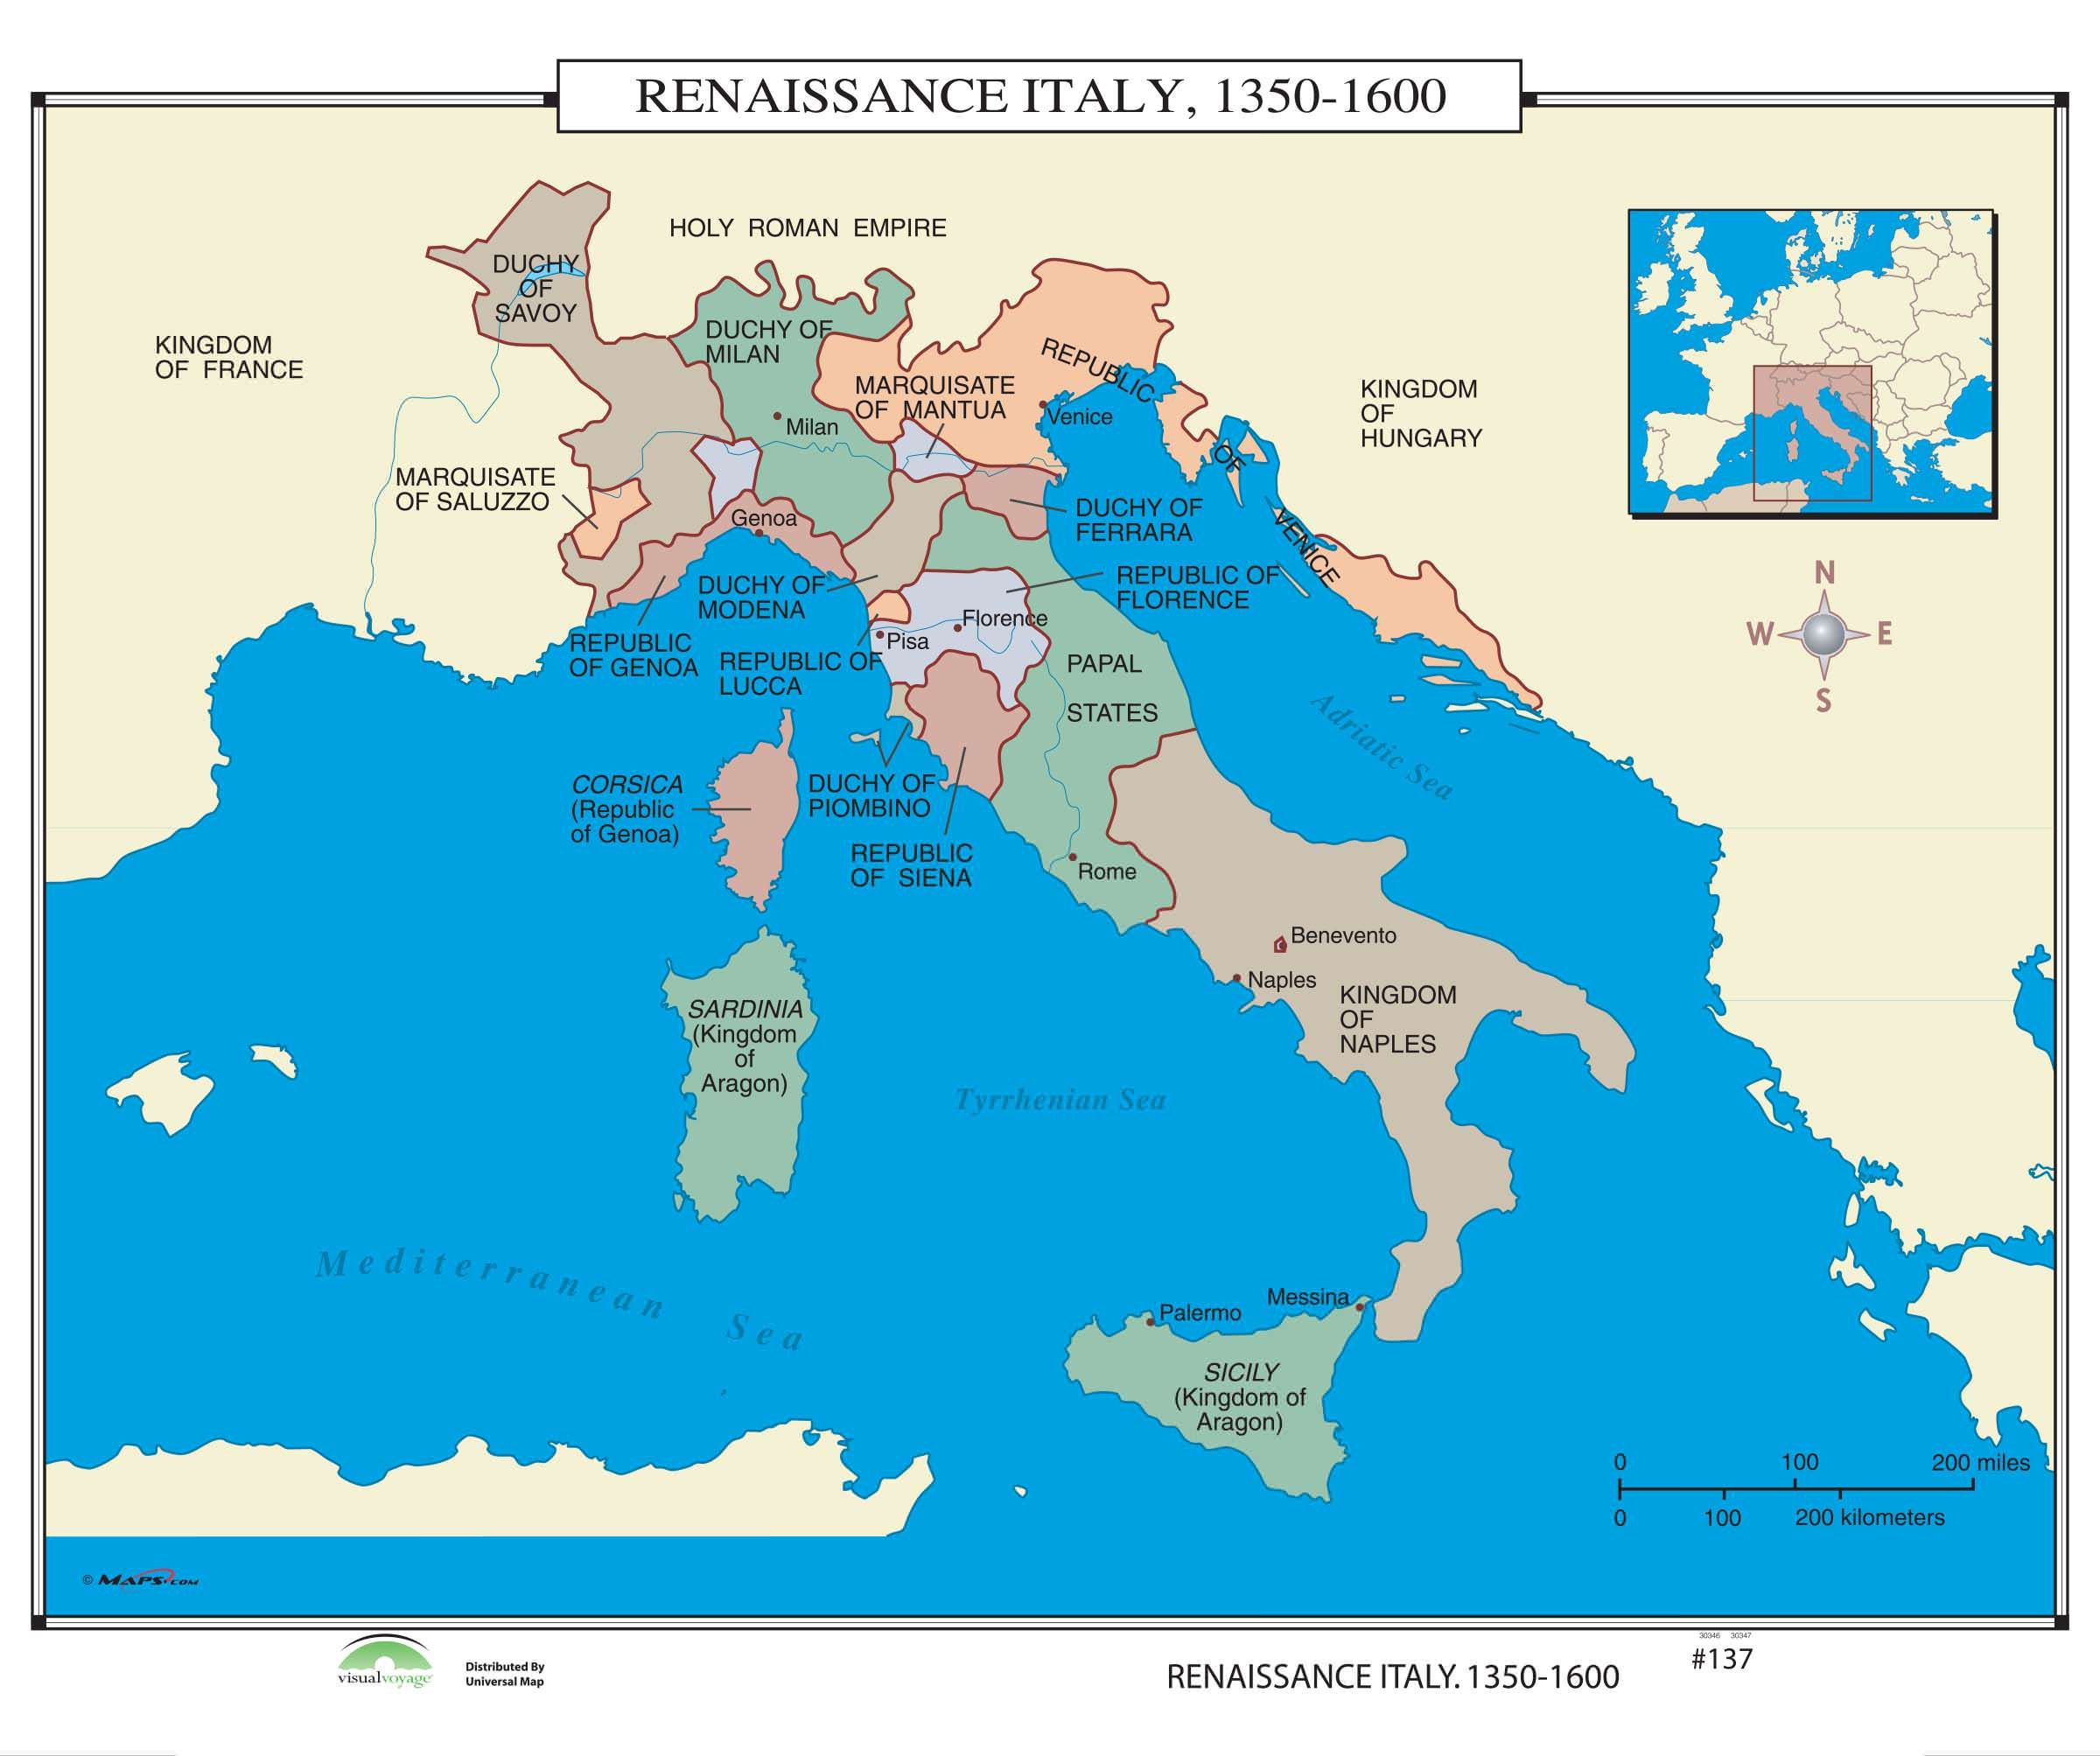 <p>Italy was in the middle of the Mediterranean sea which connected Asia, Africa, and Europe which allowed for the major port cities in Italy to experience culture and financial growth</p>